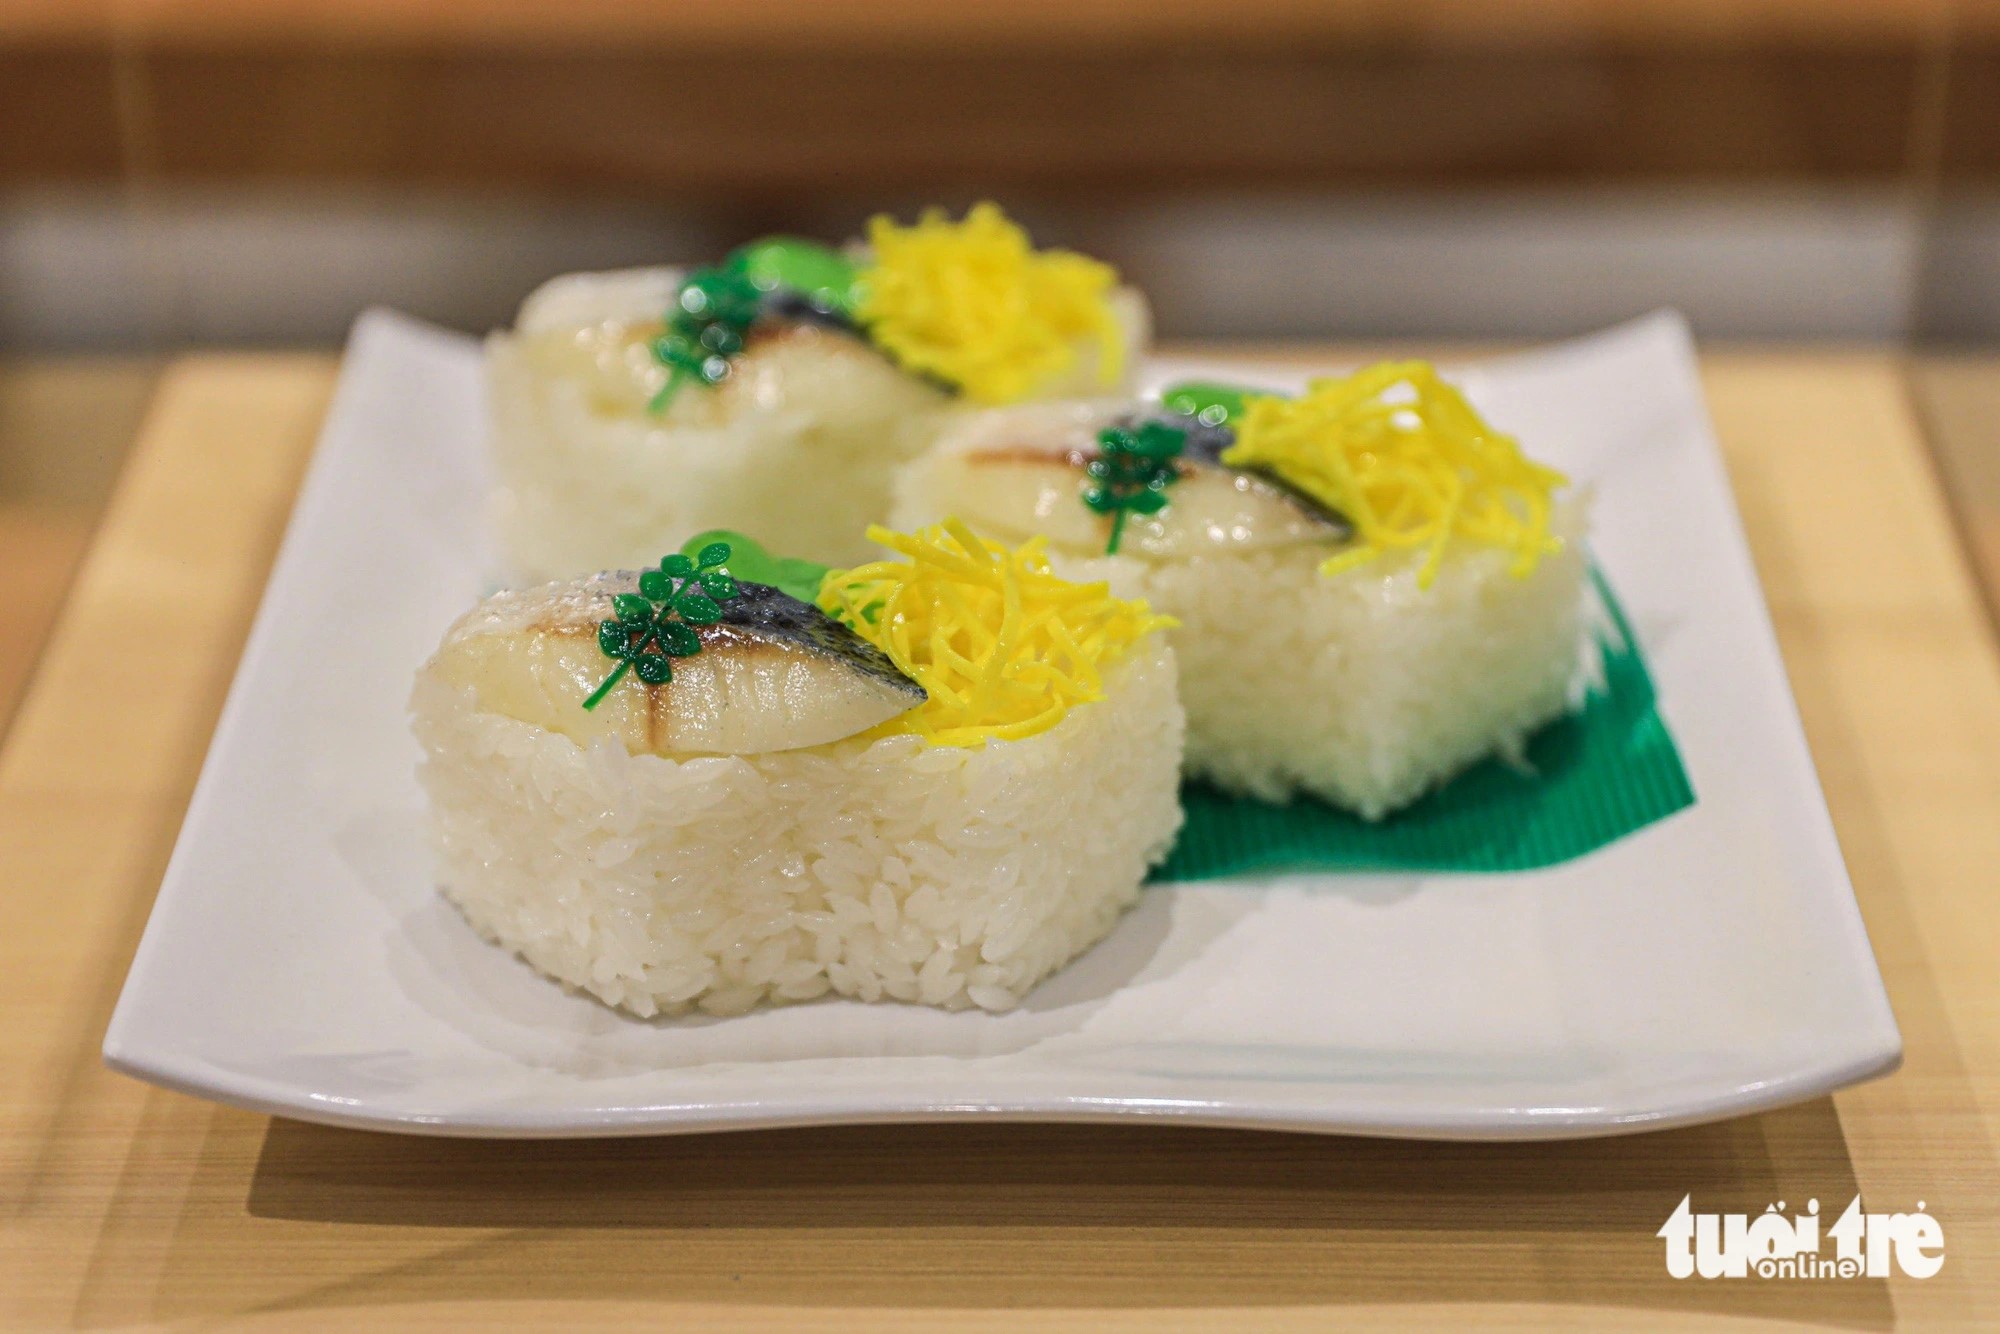 Sushi Oshinuki-zushi comes in various shapes, often made by newly married women to strengthen familial ties by gifting them to their parents-in-law. Photo: Danh Khang / Tuoi Tre